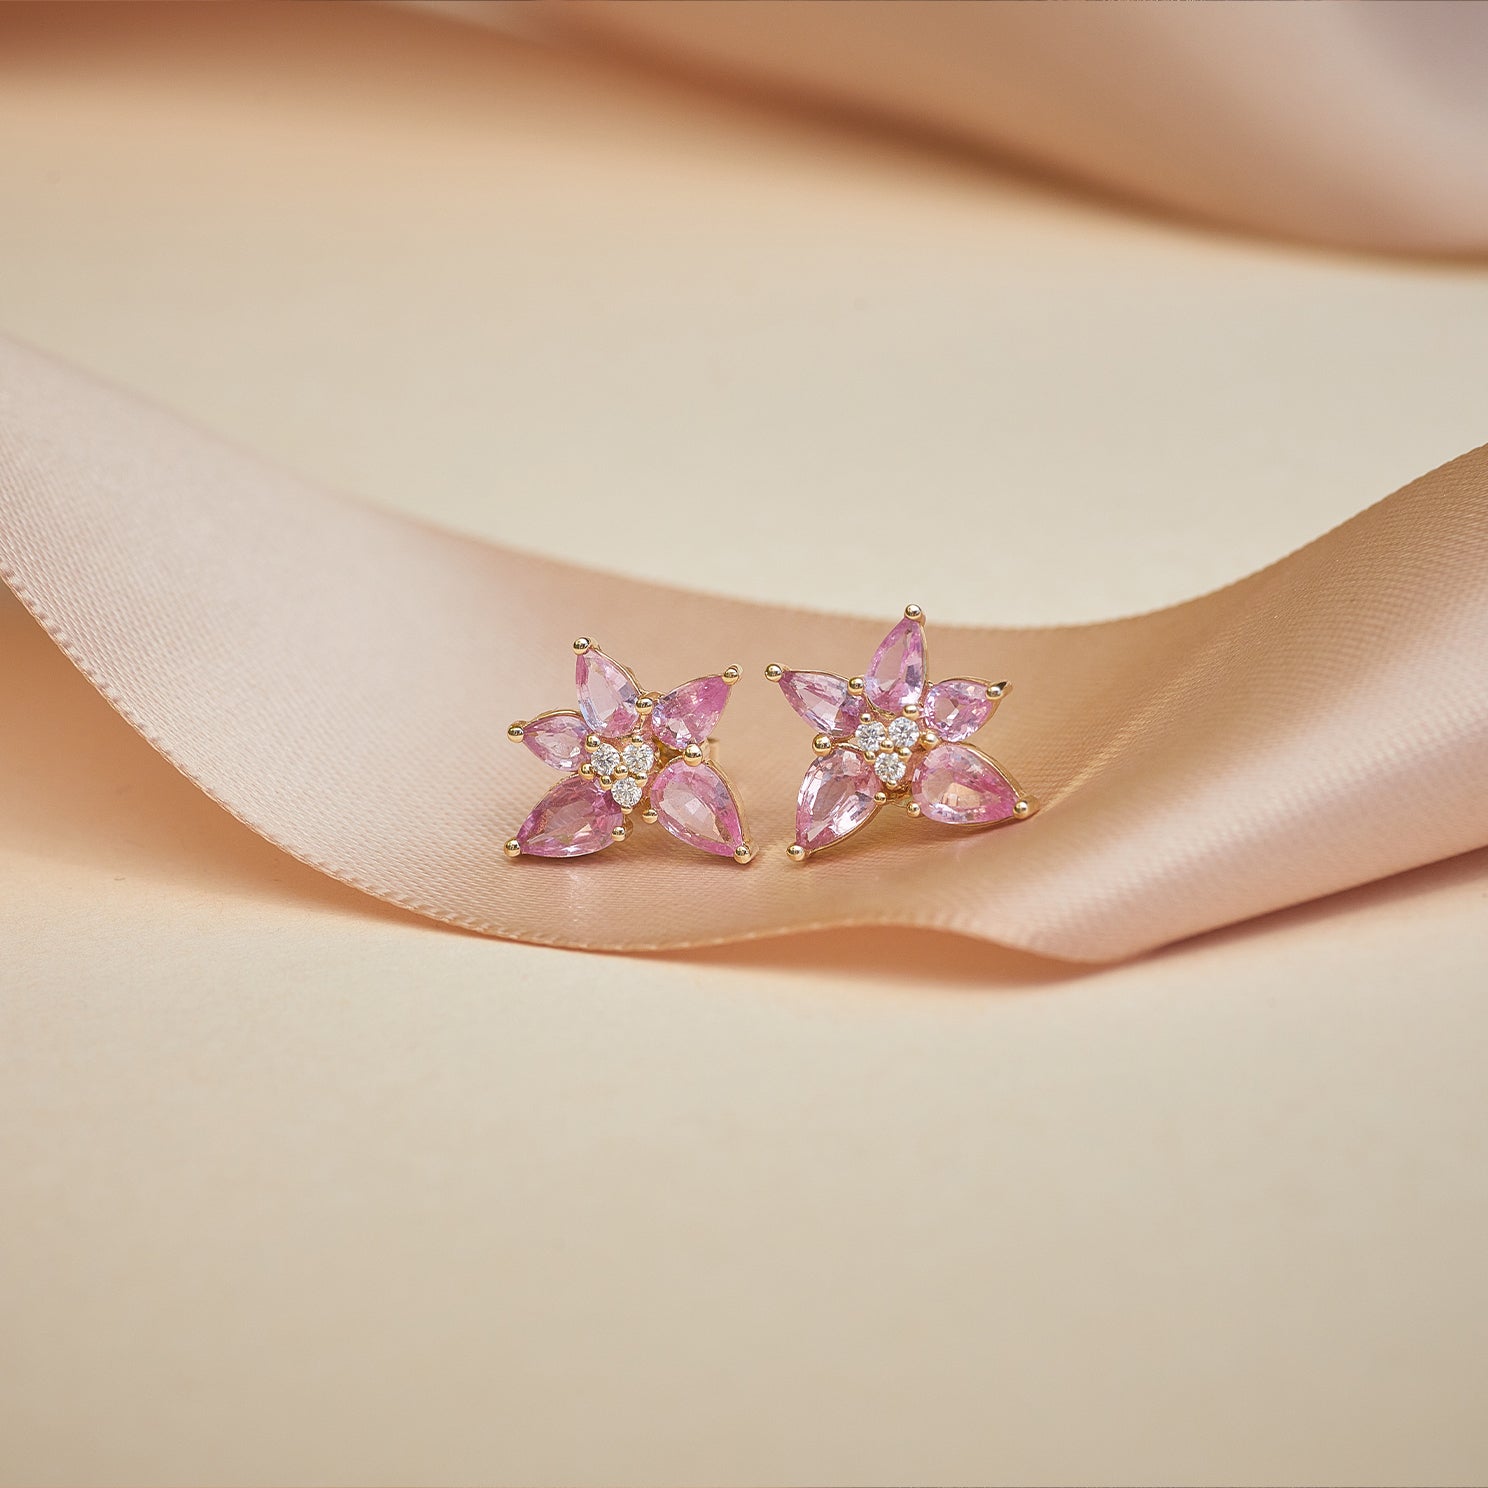 Louis Vuitton Blossom Earcuff, White Gold and Diamonds - Categories